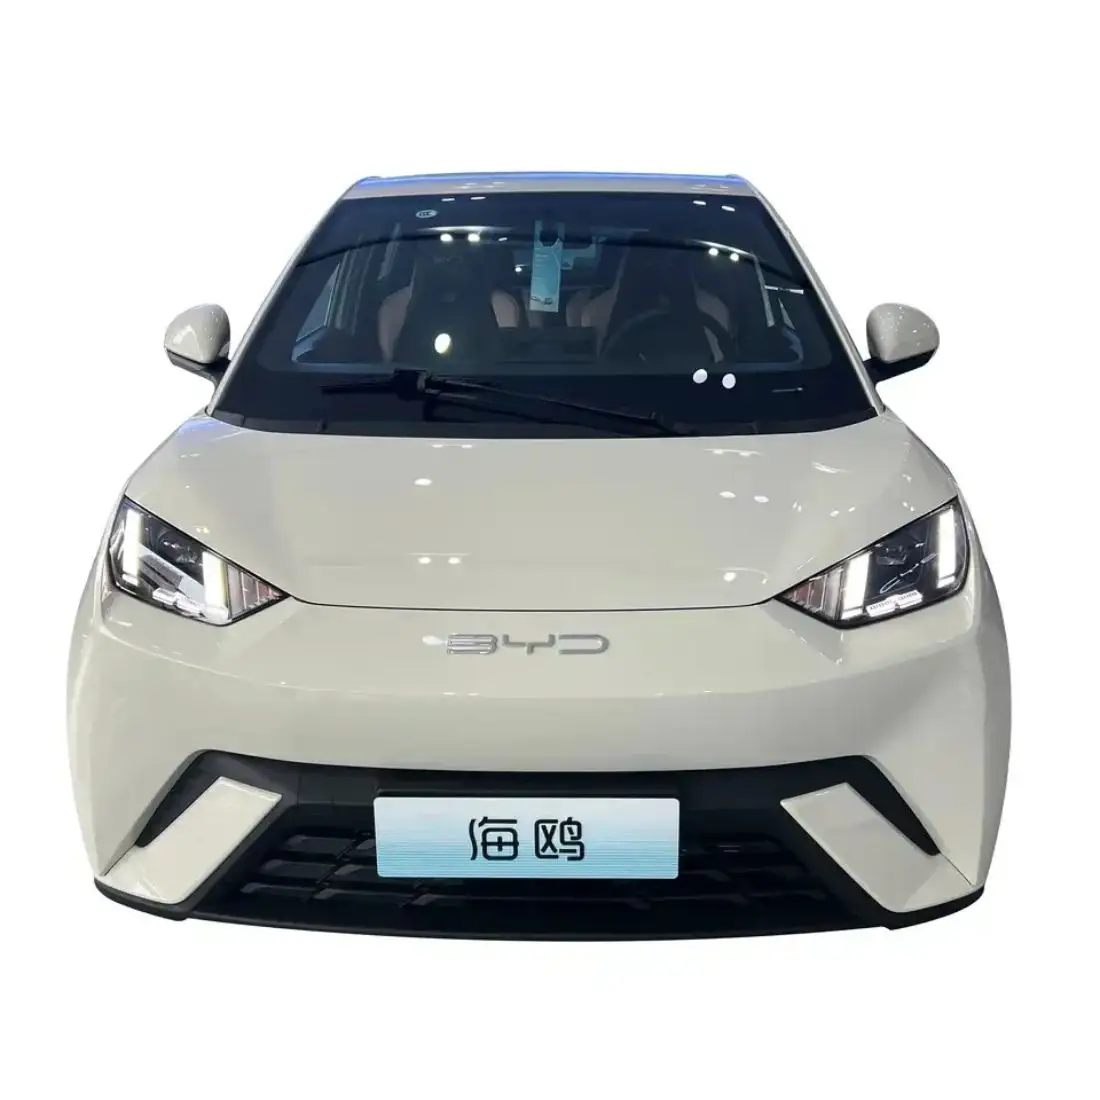 Electric Car Cheapest Chinese Byd Seagull Yuan Plus Song Plus Tang Ev Car Gasoline Car China Free